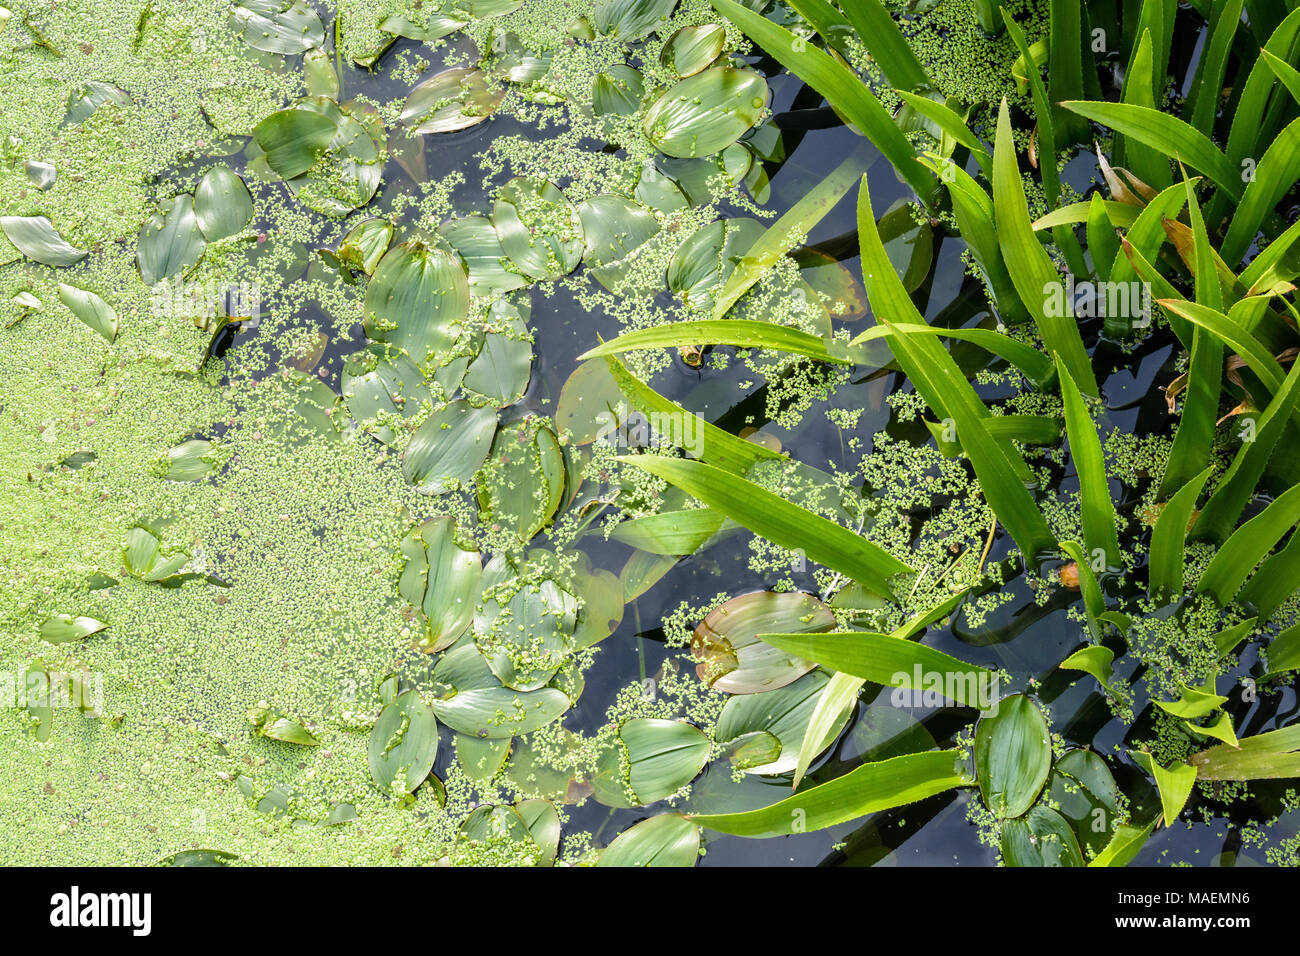 View from above of a typical pond environment comprising duckweed floating on the surface of the water and semi-aquatic plants with elongated and oval Stock Photo